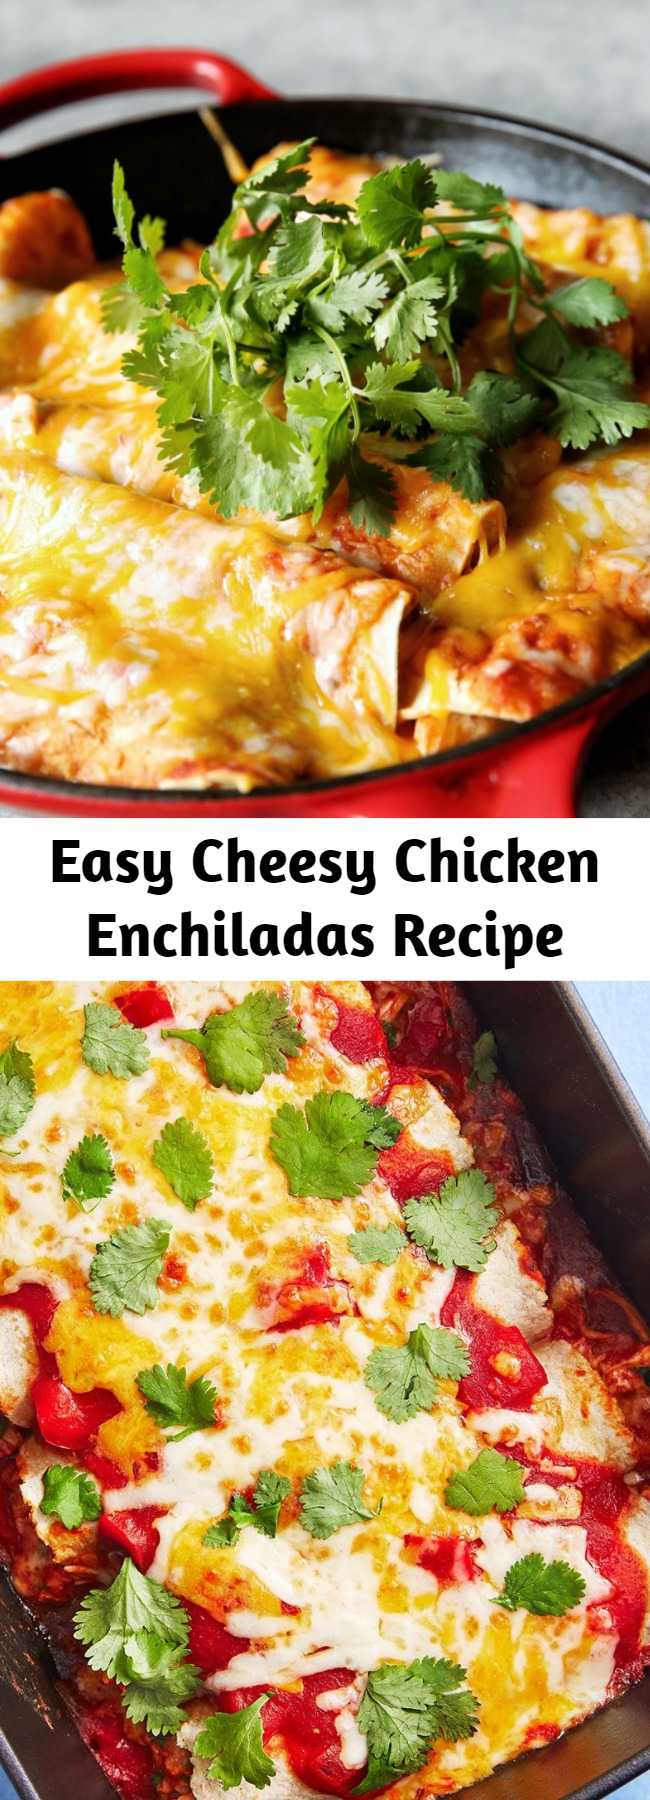 Easy Cheesy Chicken Enchiladas Recipe - These enchiladas fall somewhere in between; they're definitely Tex-Mex at their core, but we went with corn tortillas in place of flour. (Go ahead and use flour if that's your preference though!) They may not be authentic by, well, anyone's standards, but they are quick, easy, filling, and delicious.